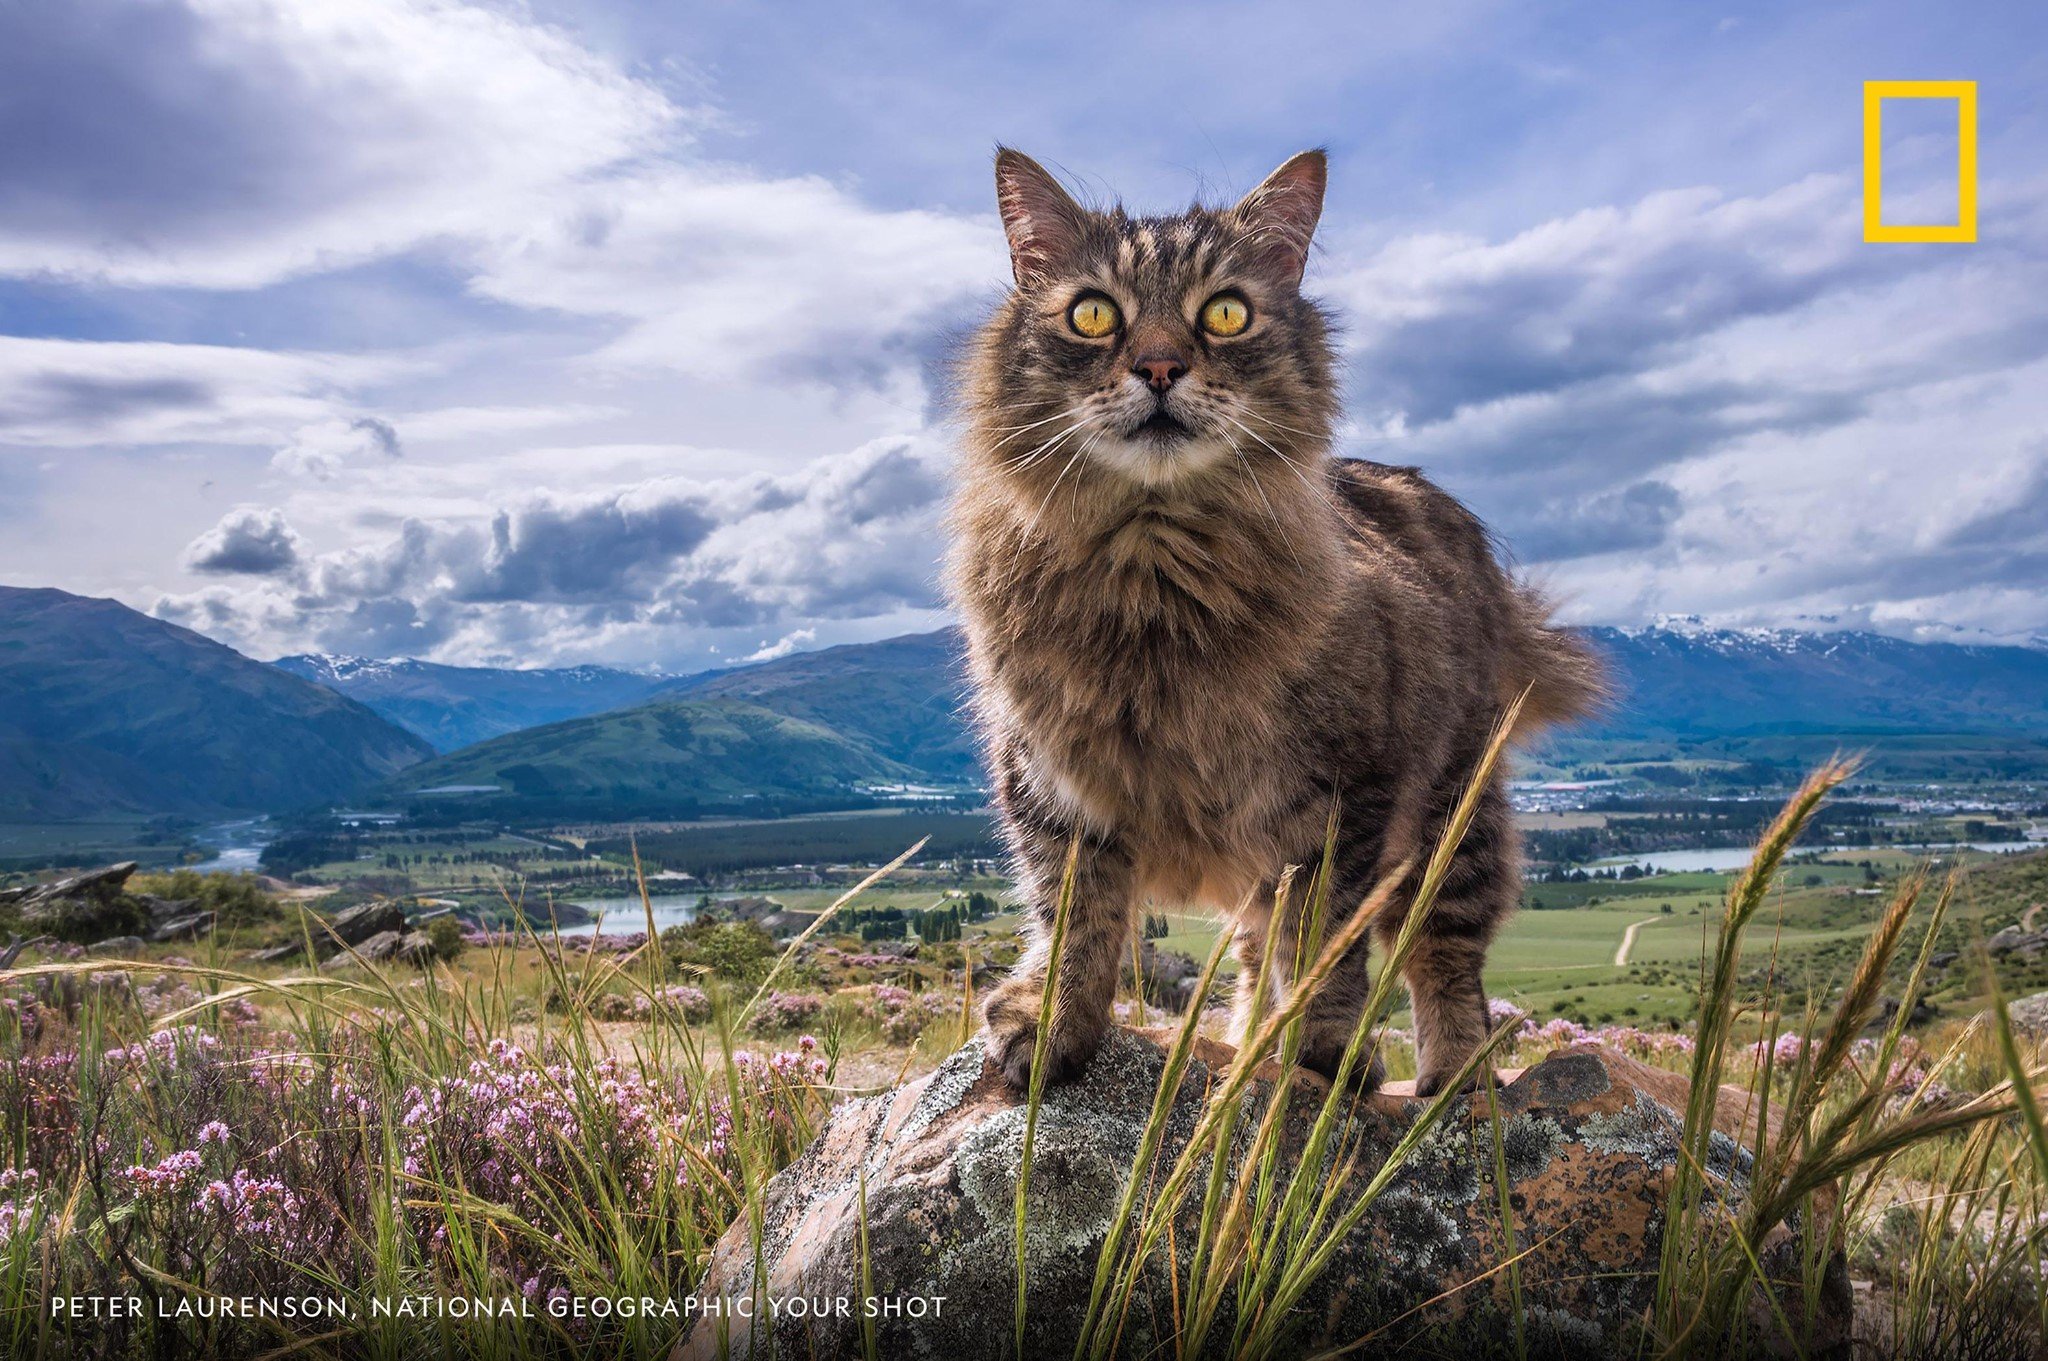 Happy International Cat Day! "Scruff keeps an eye on things from his high country perch [in] Bannockburn, Central Otago, New Zealand," writes Your Shot photographer Peter Laurenson. What's your fearless feline's favorite perch? https://on.natgeo.com/2YRdggO